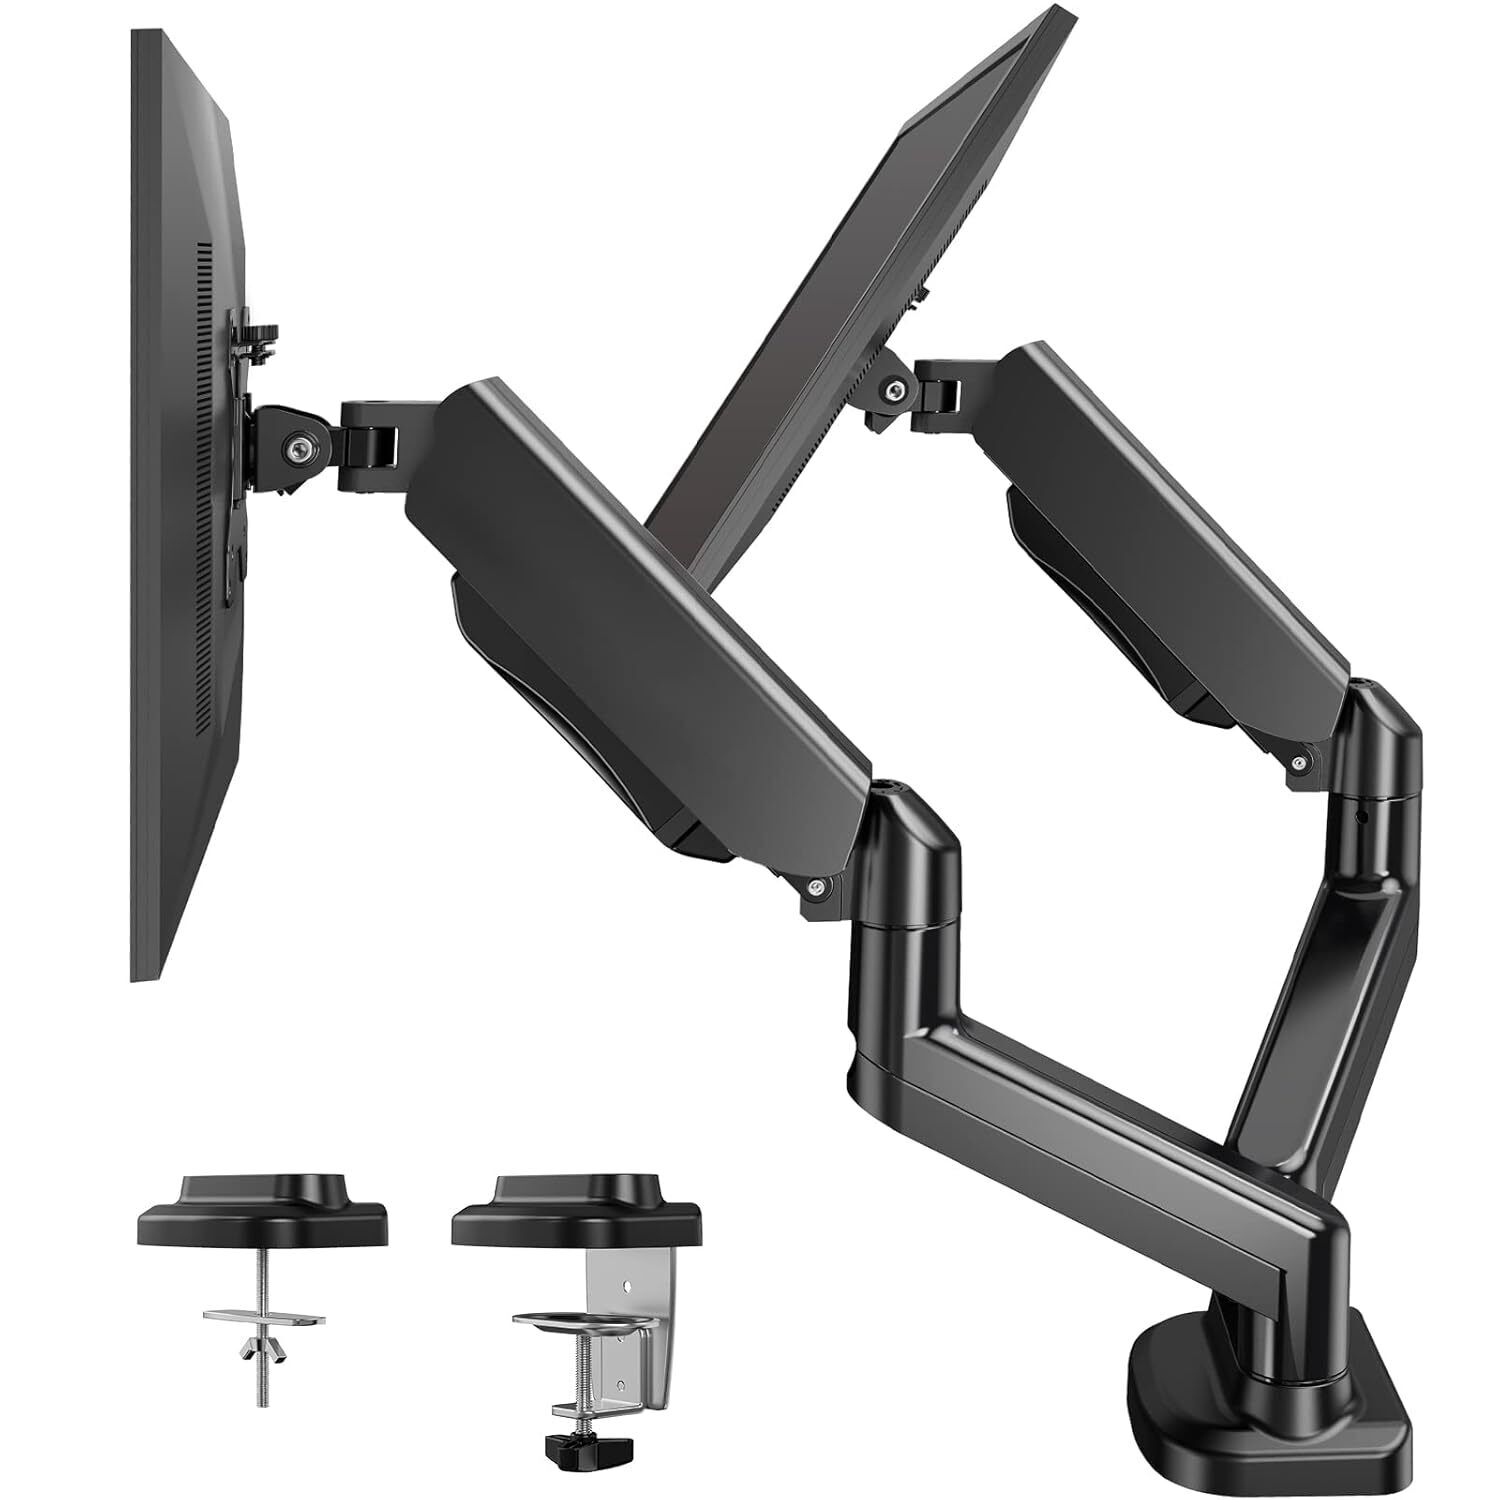 HUANUO Dual Monitor Arm for 13 to 27 inch, Gas Spring Monitor Stands for 2 Mon